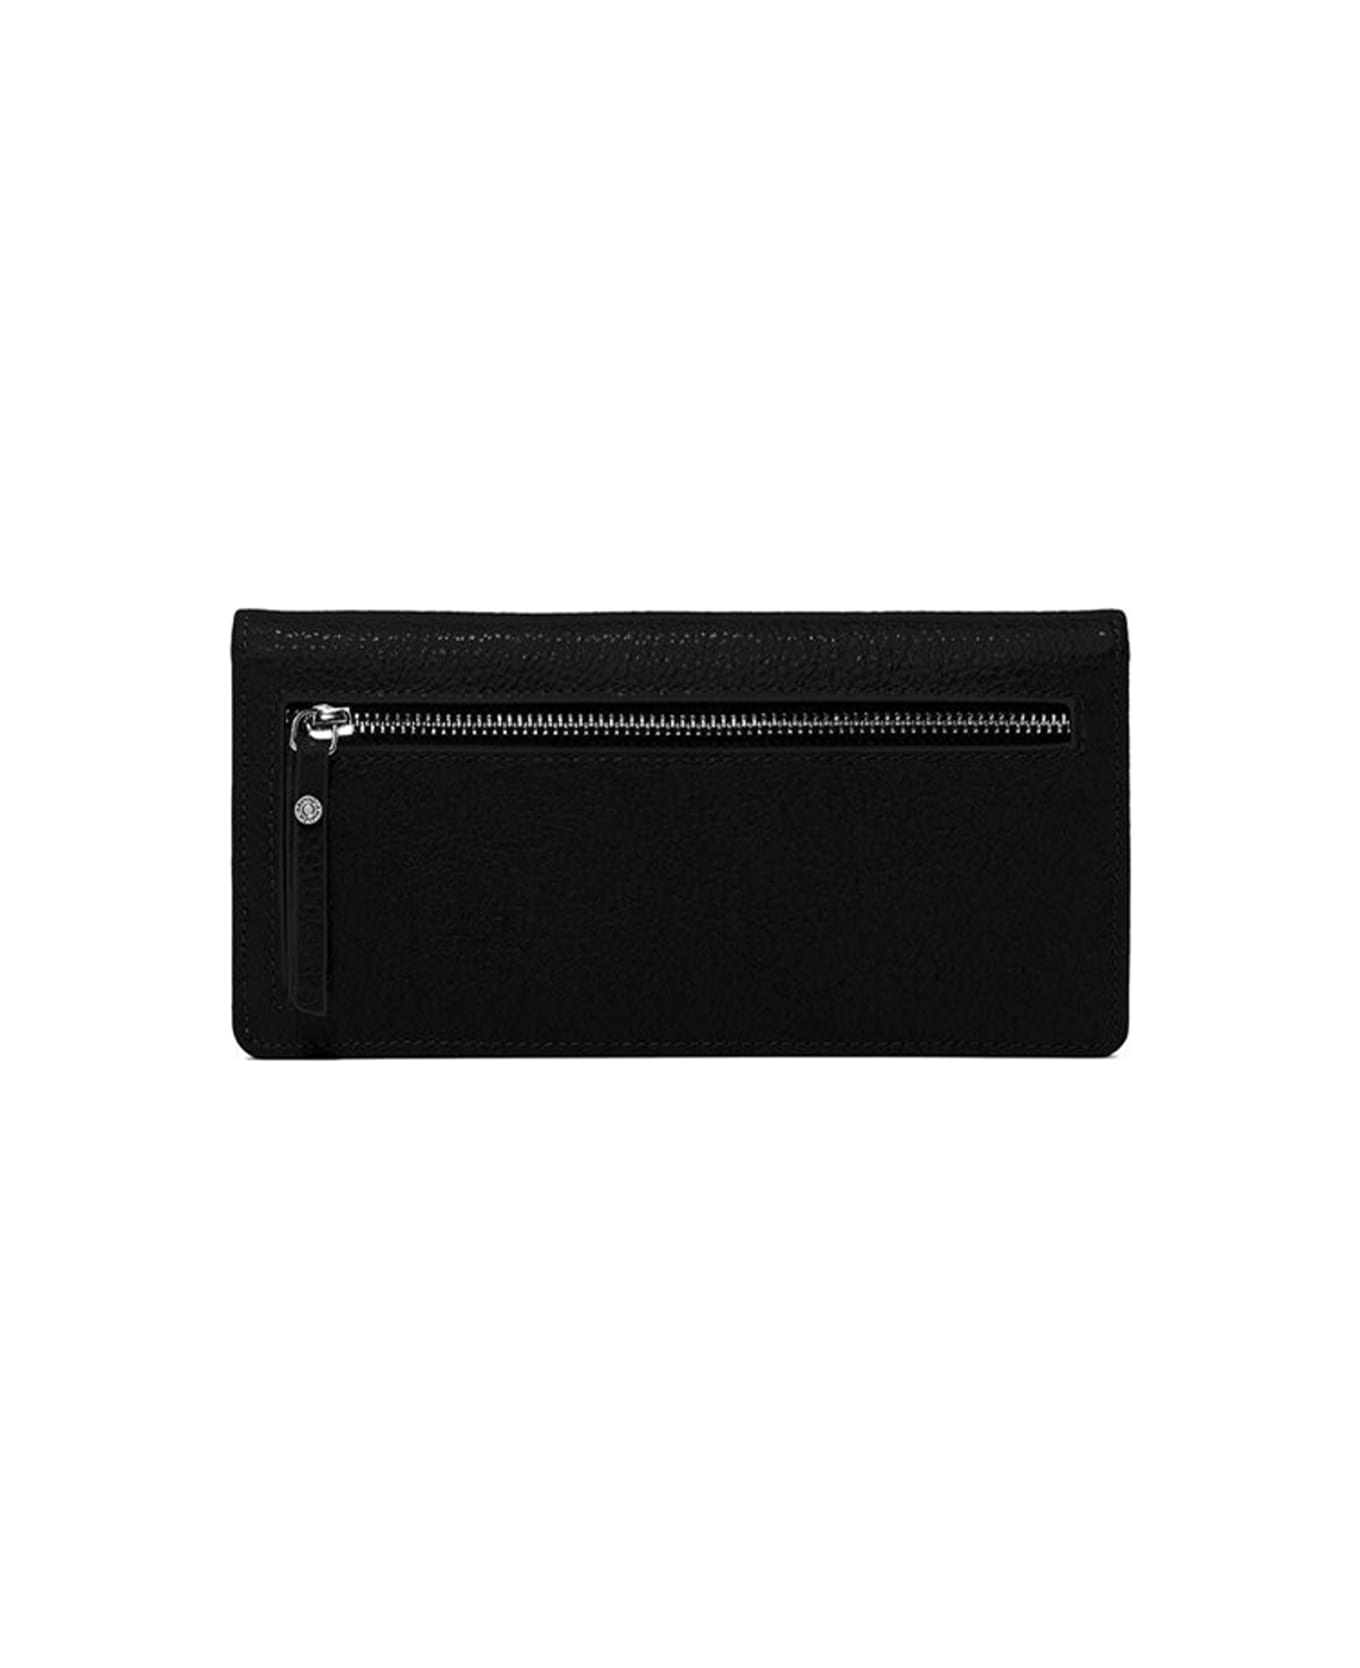 Gianni Chiarini Wallets Dollaro Wallet In Hammered Leather - NERO 財布